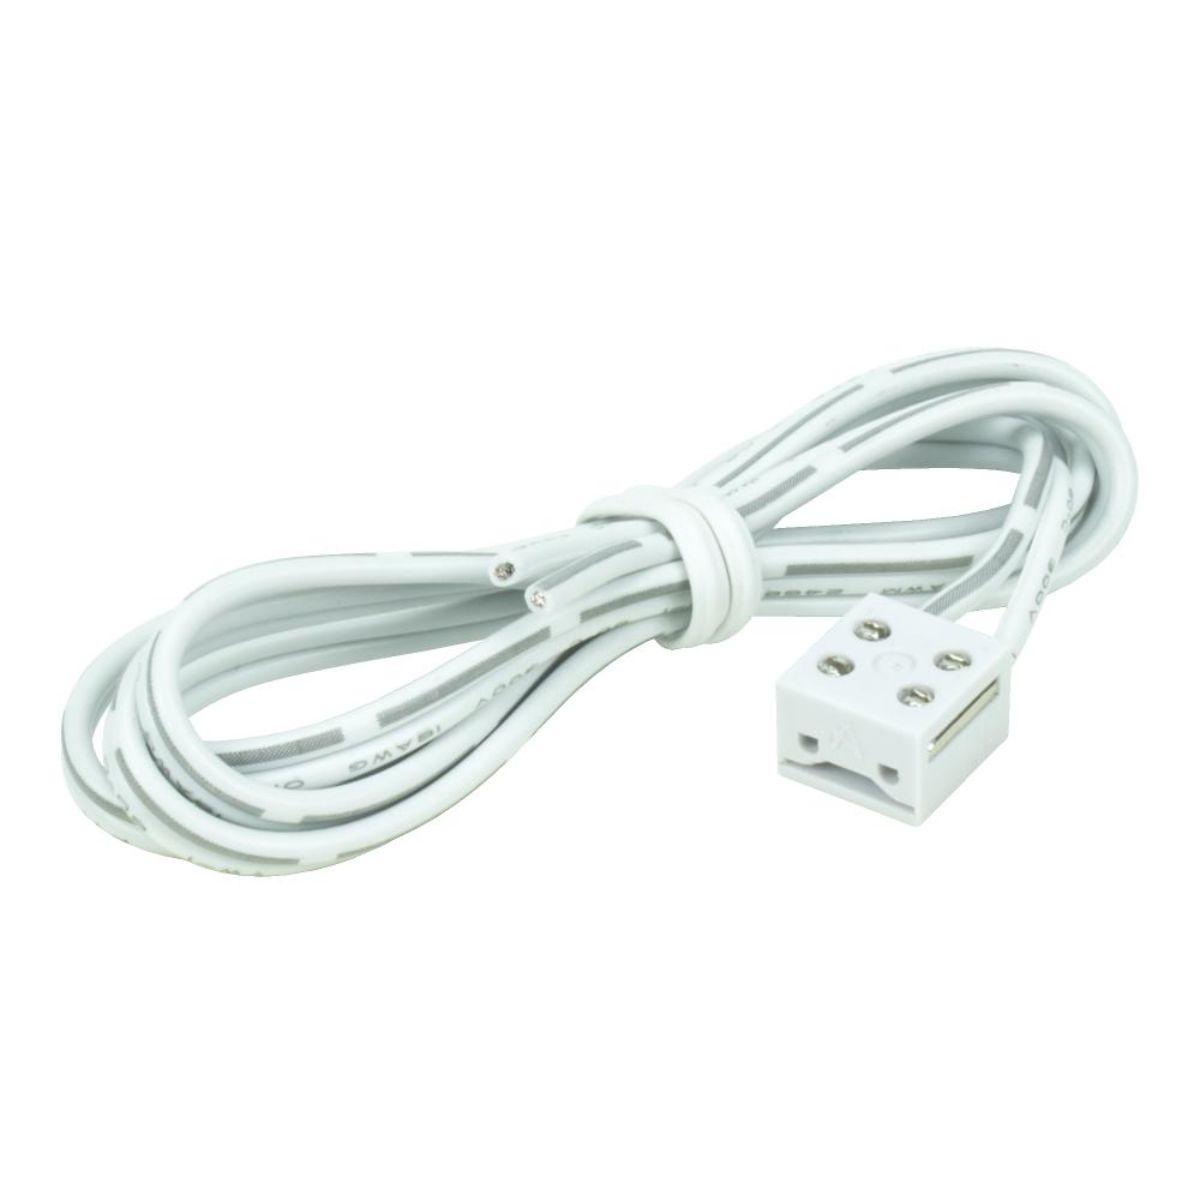 Trulink 4-in-1 Connector block with 6ft lead - Bees Lighting